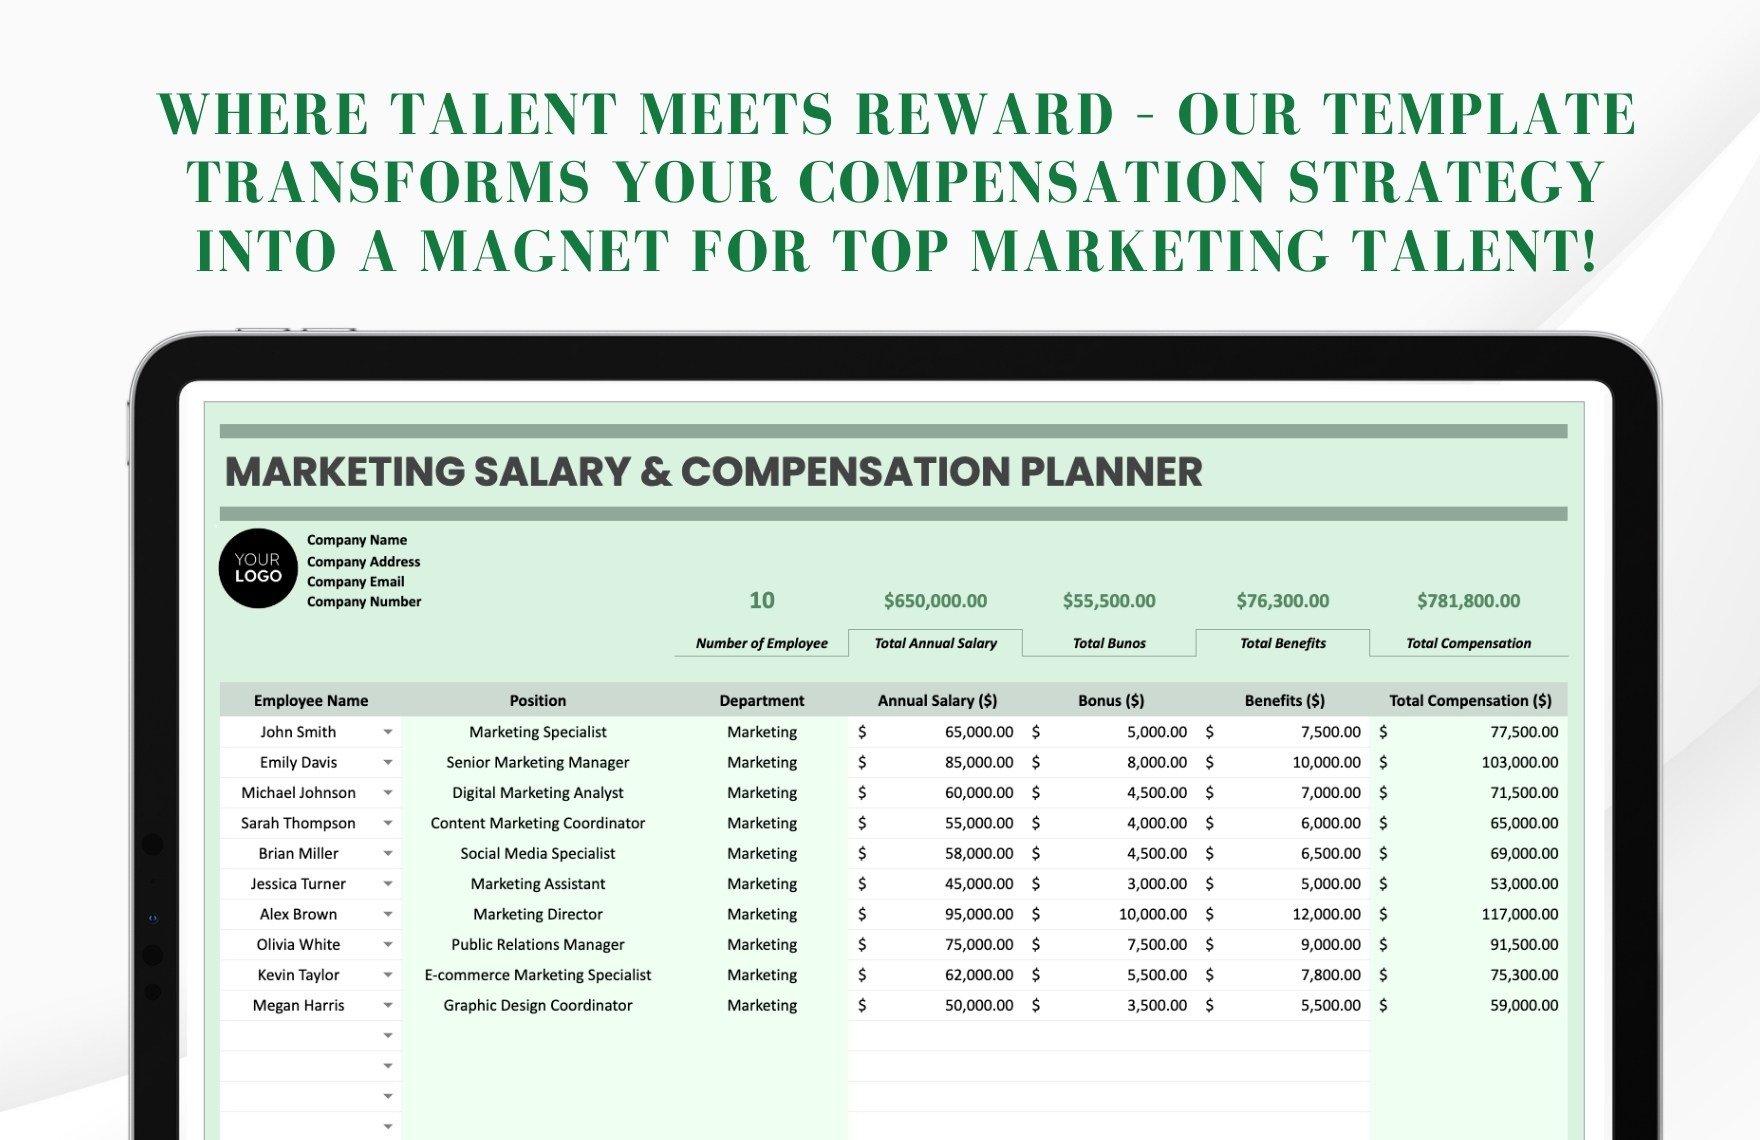 Marketing Salary & Compensation Planner Template